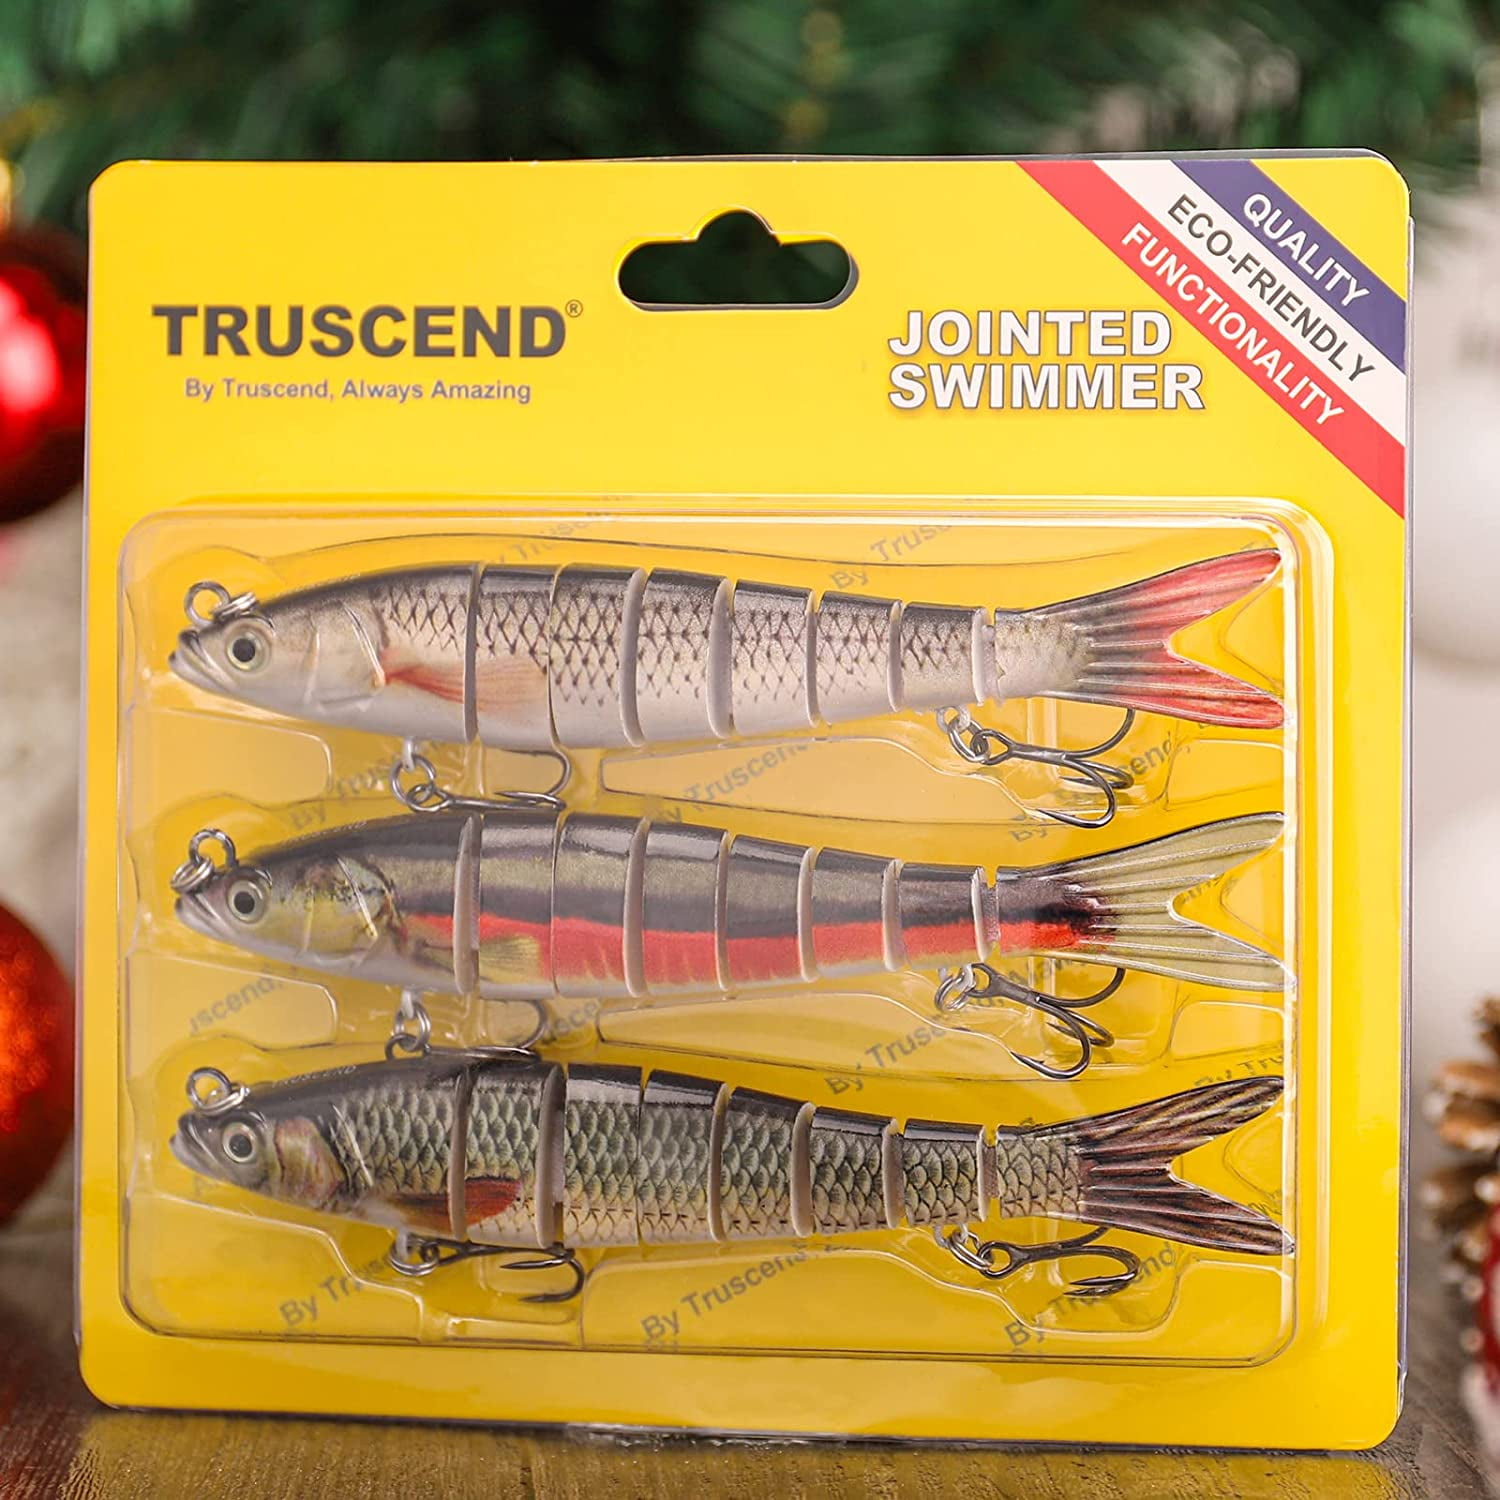 TRUSCEND Fishing Lures for Bass Trout Crappie, Slow Sinking Swimbait,  Realistic Action, TPE Material, Premium Design, Freshwater & Saltwater